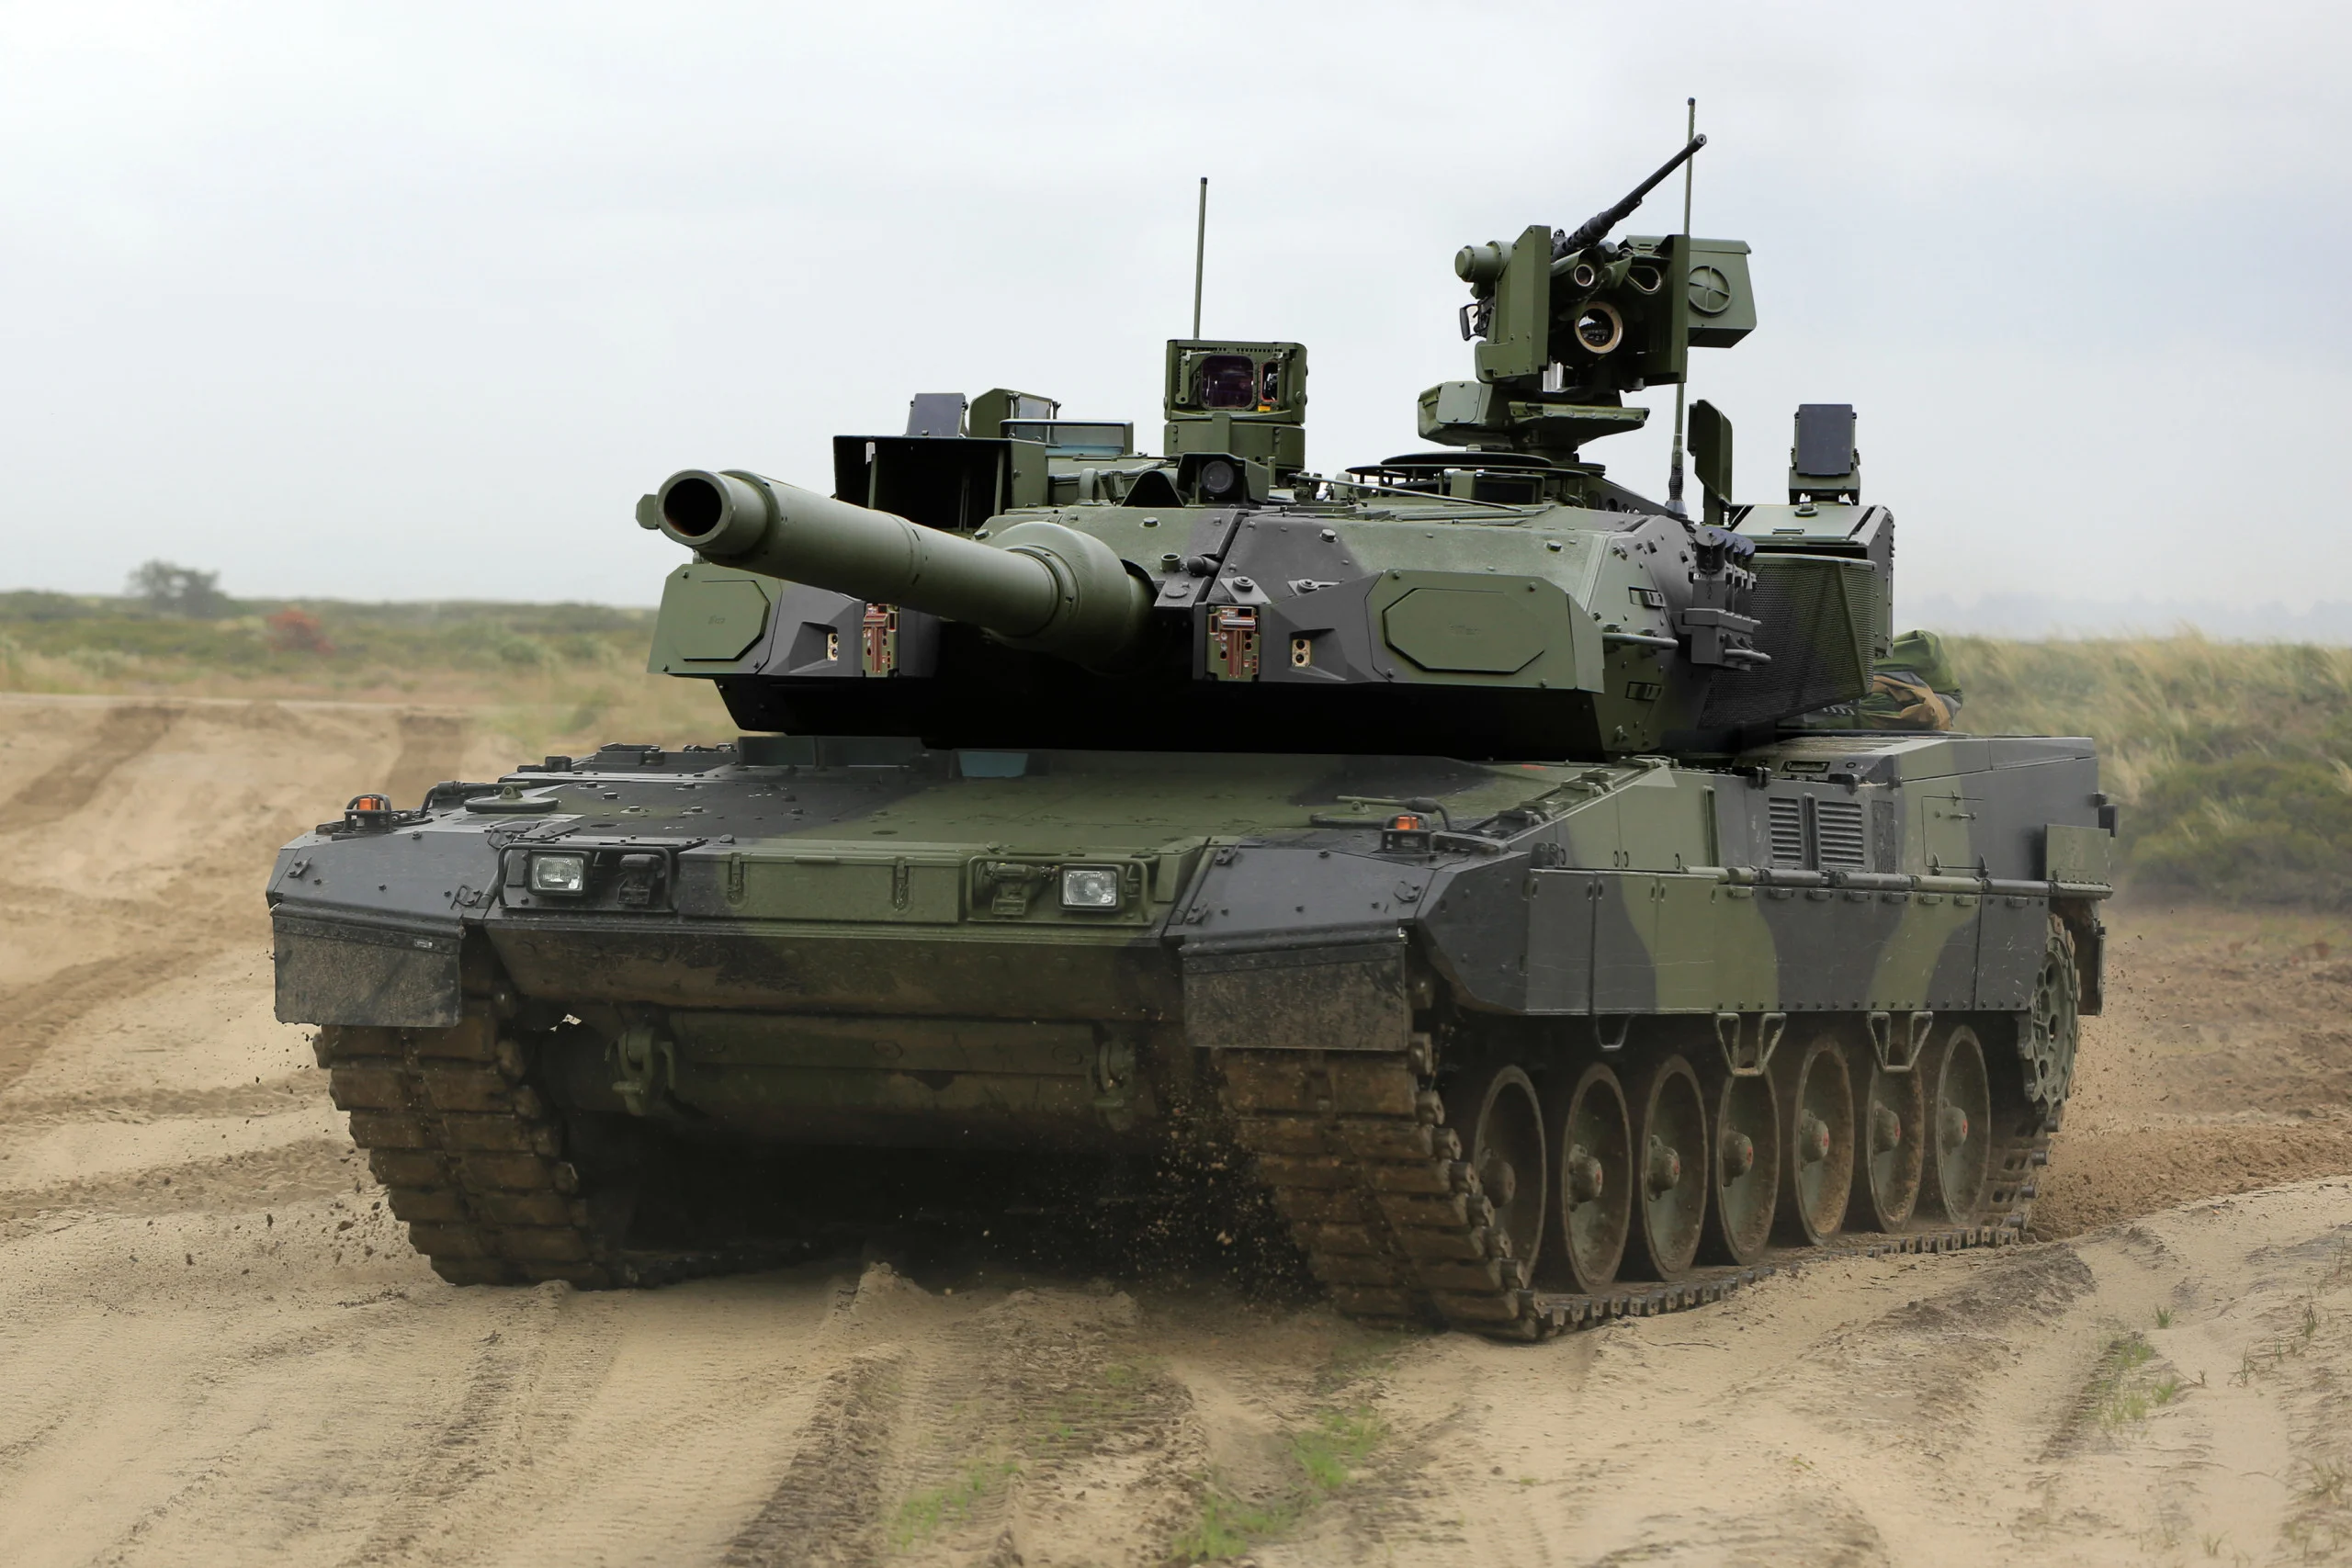 Leopard 2 is the main product of KMW